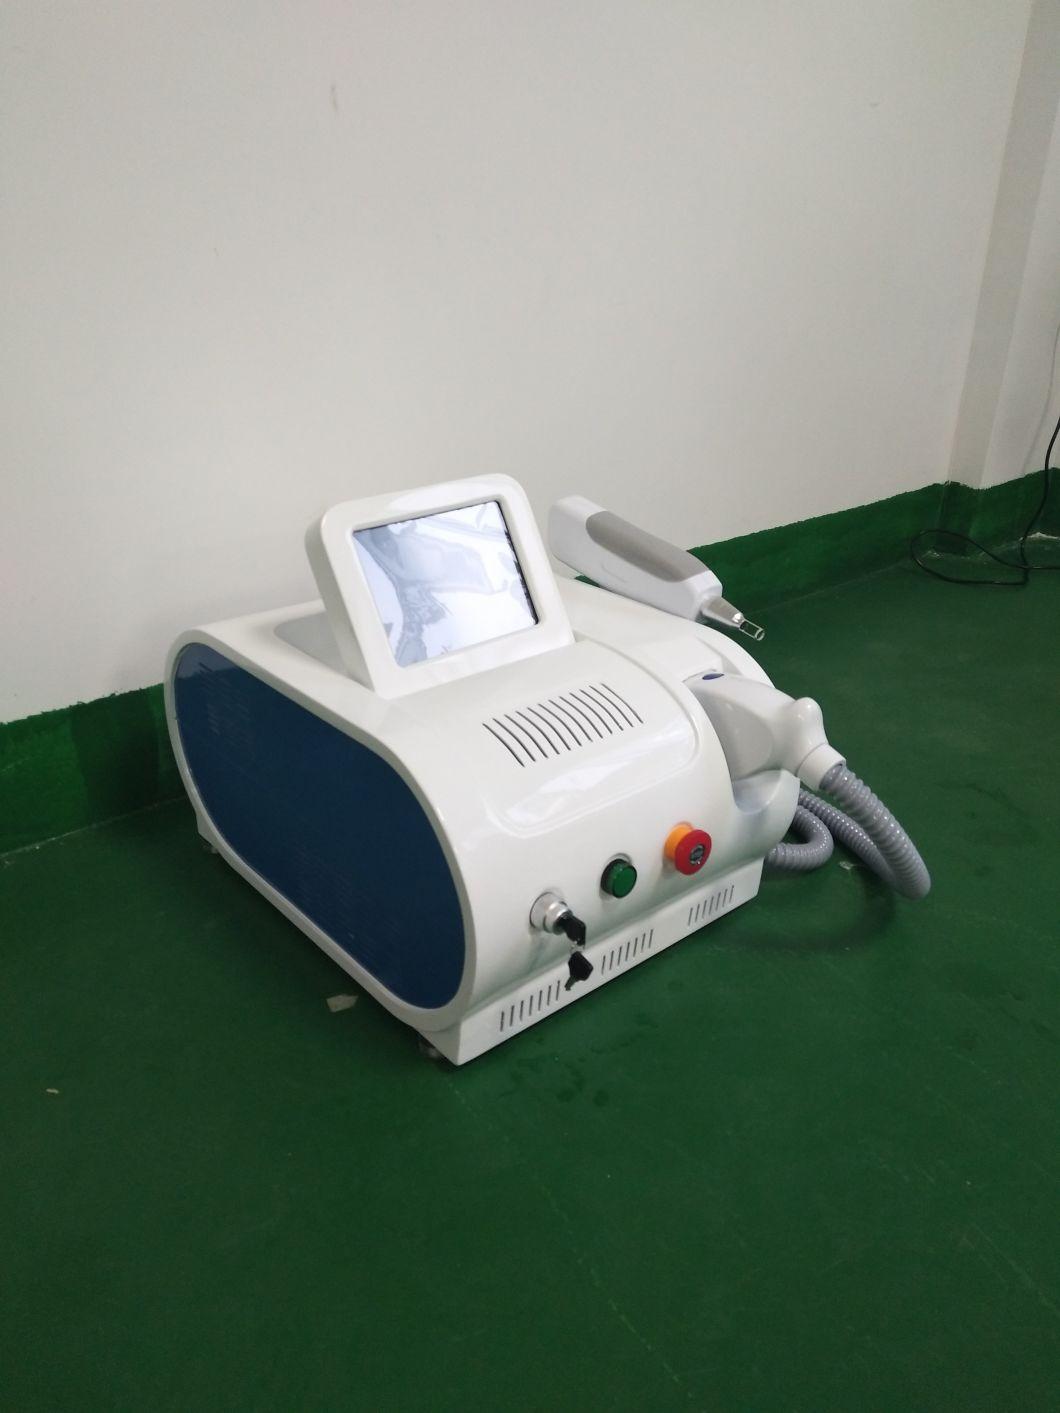 CE Certificate Lower Cost and Wider Application Laser Machine Beauty System ND YAG Laser Tattoo Removal Mslyl07